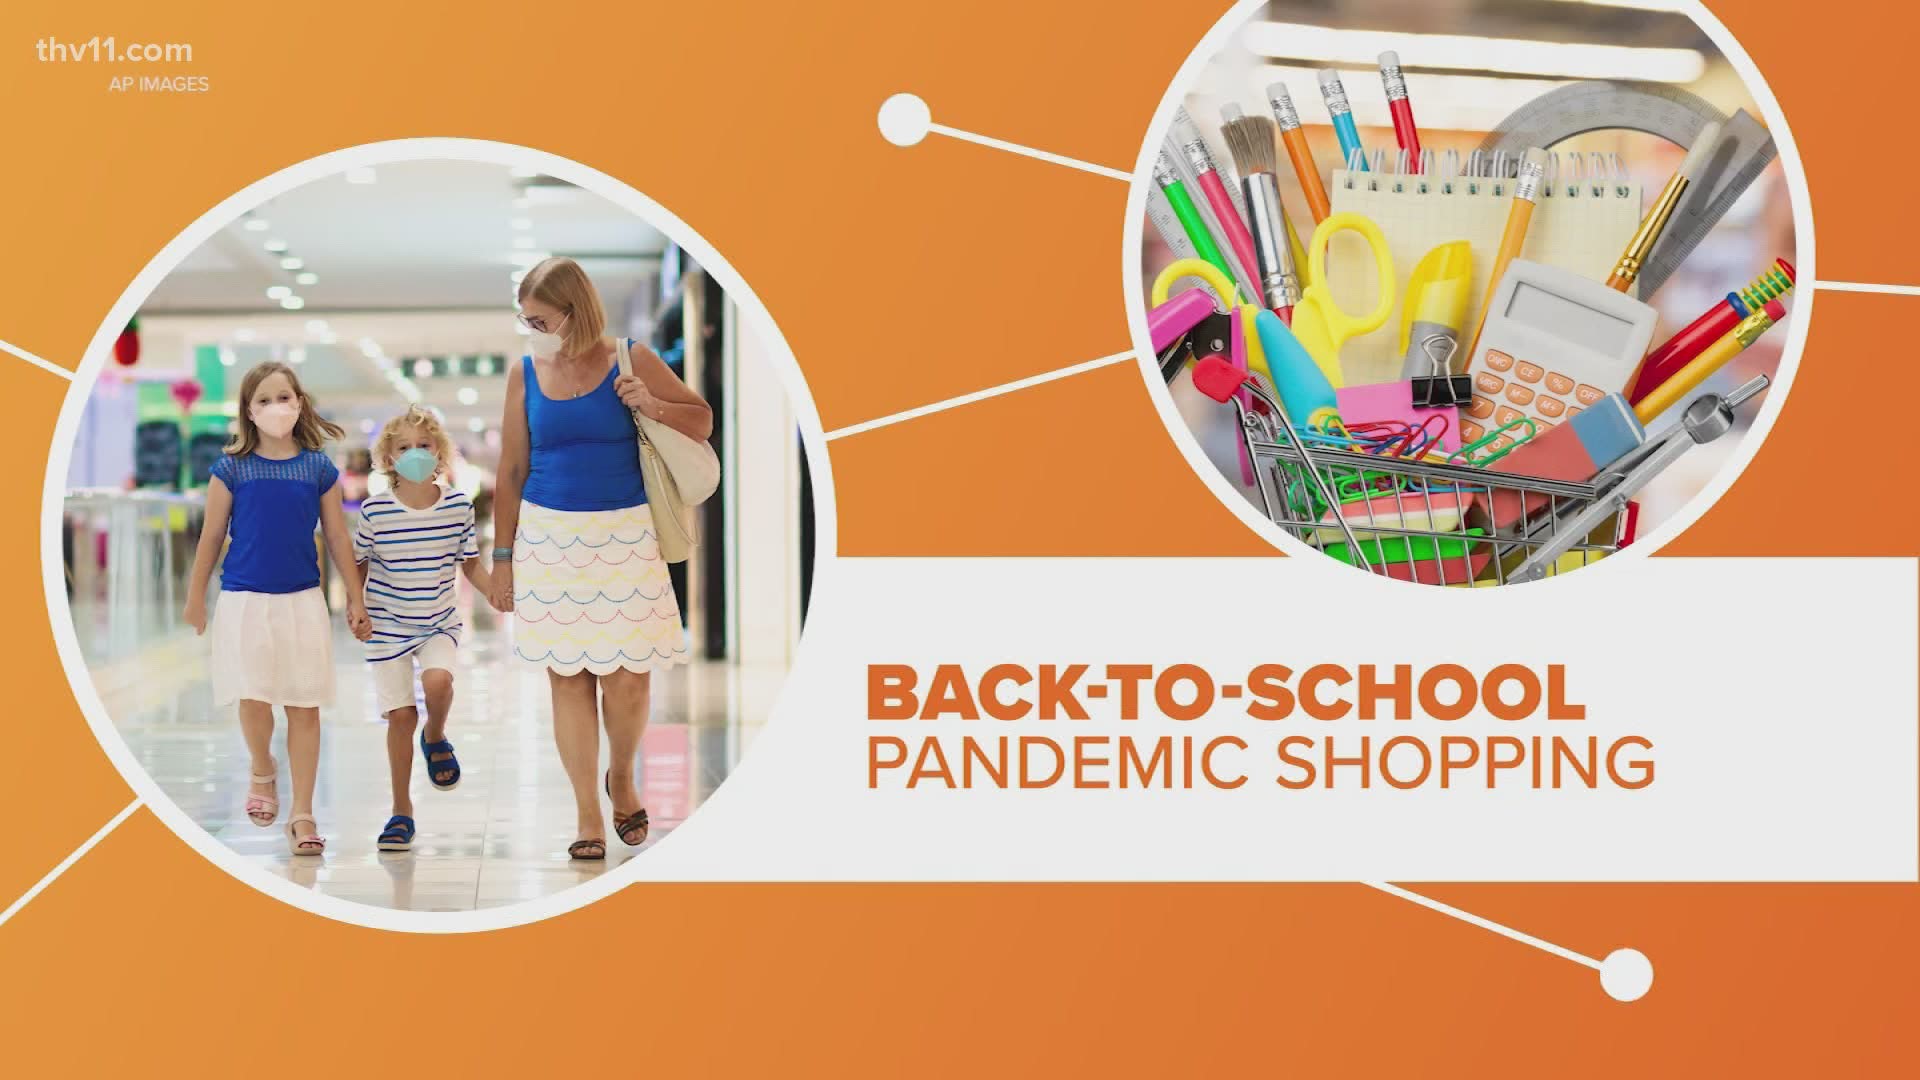 Michael Aaron explains how the pandemic is forcing many parents to shell out more money for back to school, than they might've planned.